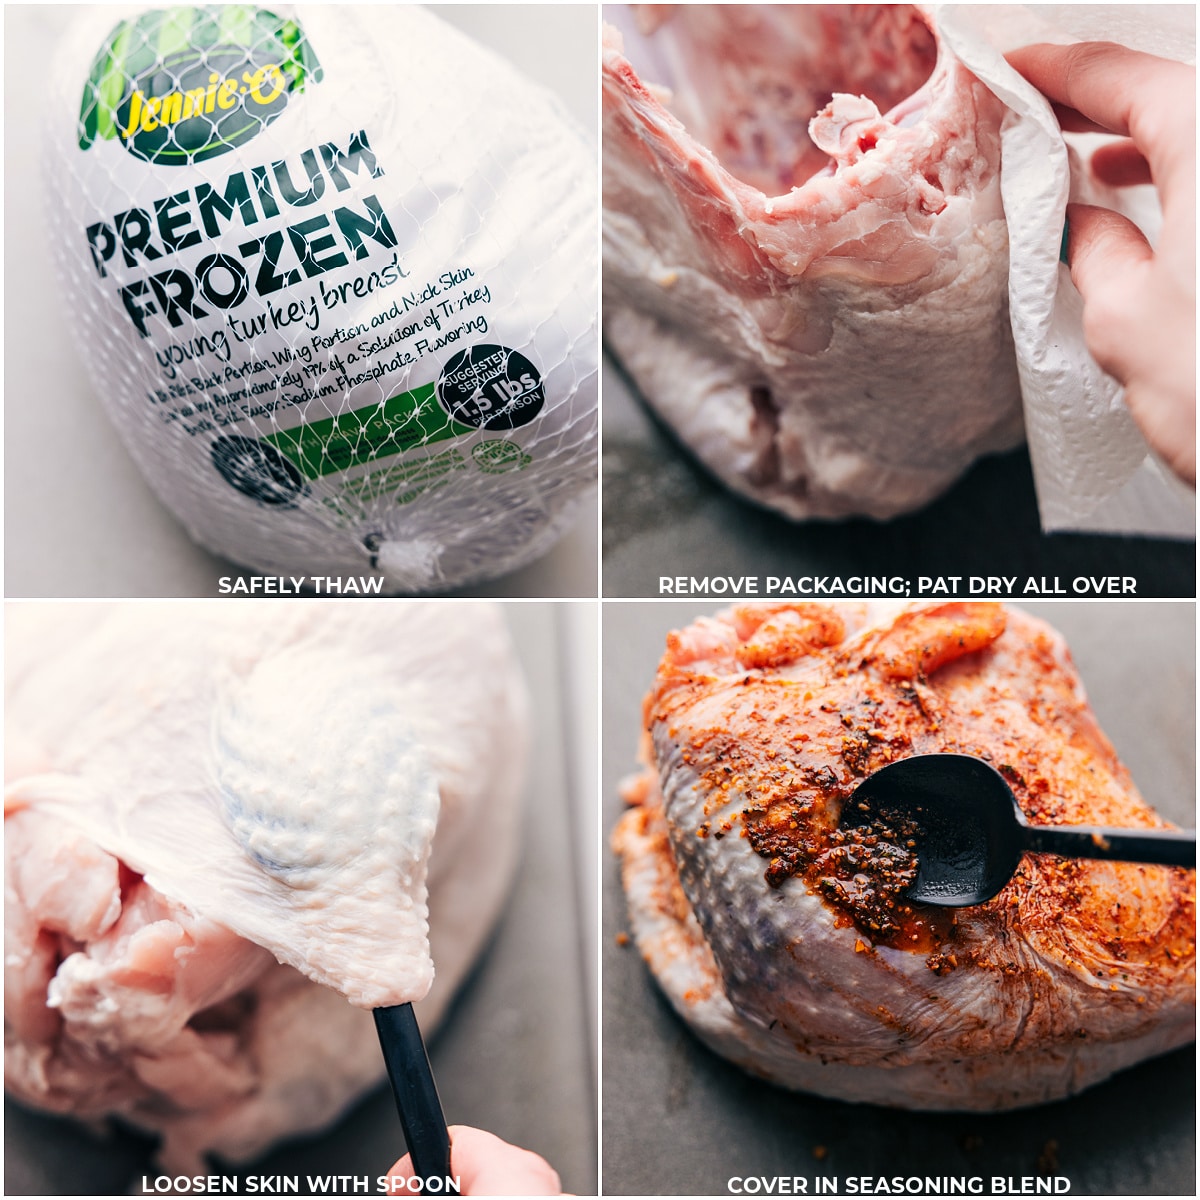 Thawed turkey being removed from packaging, patted dry, with skin loosened and covered in a seasoning blend.